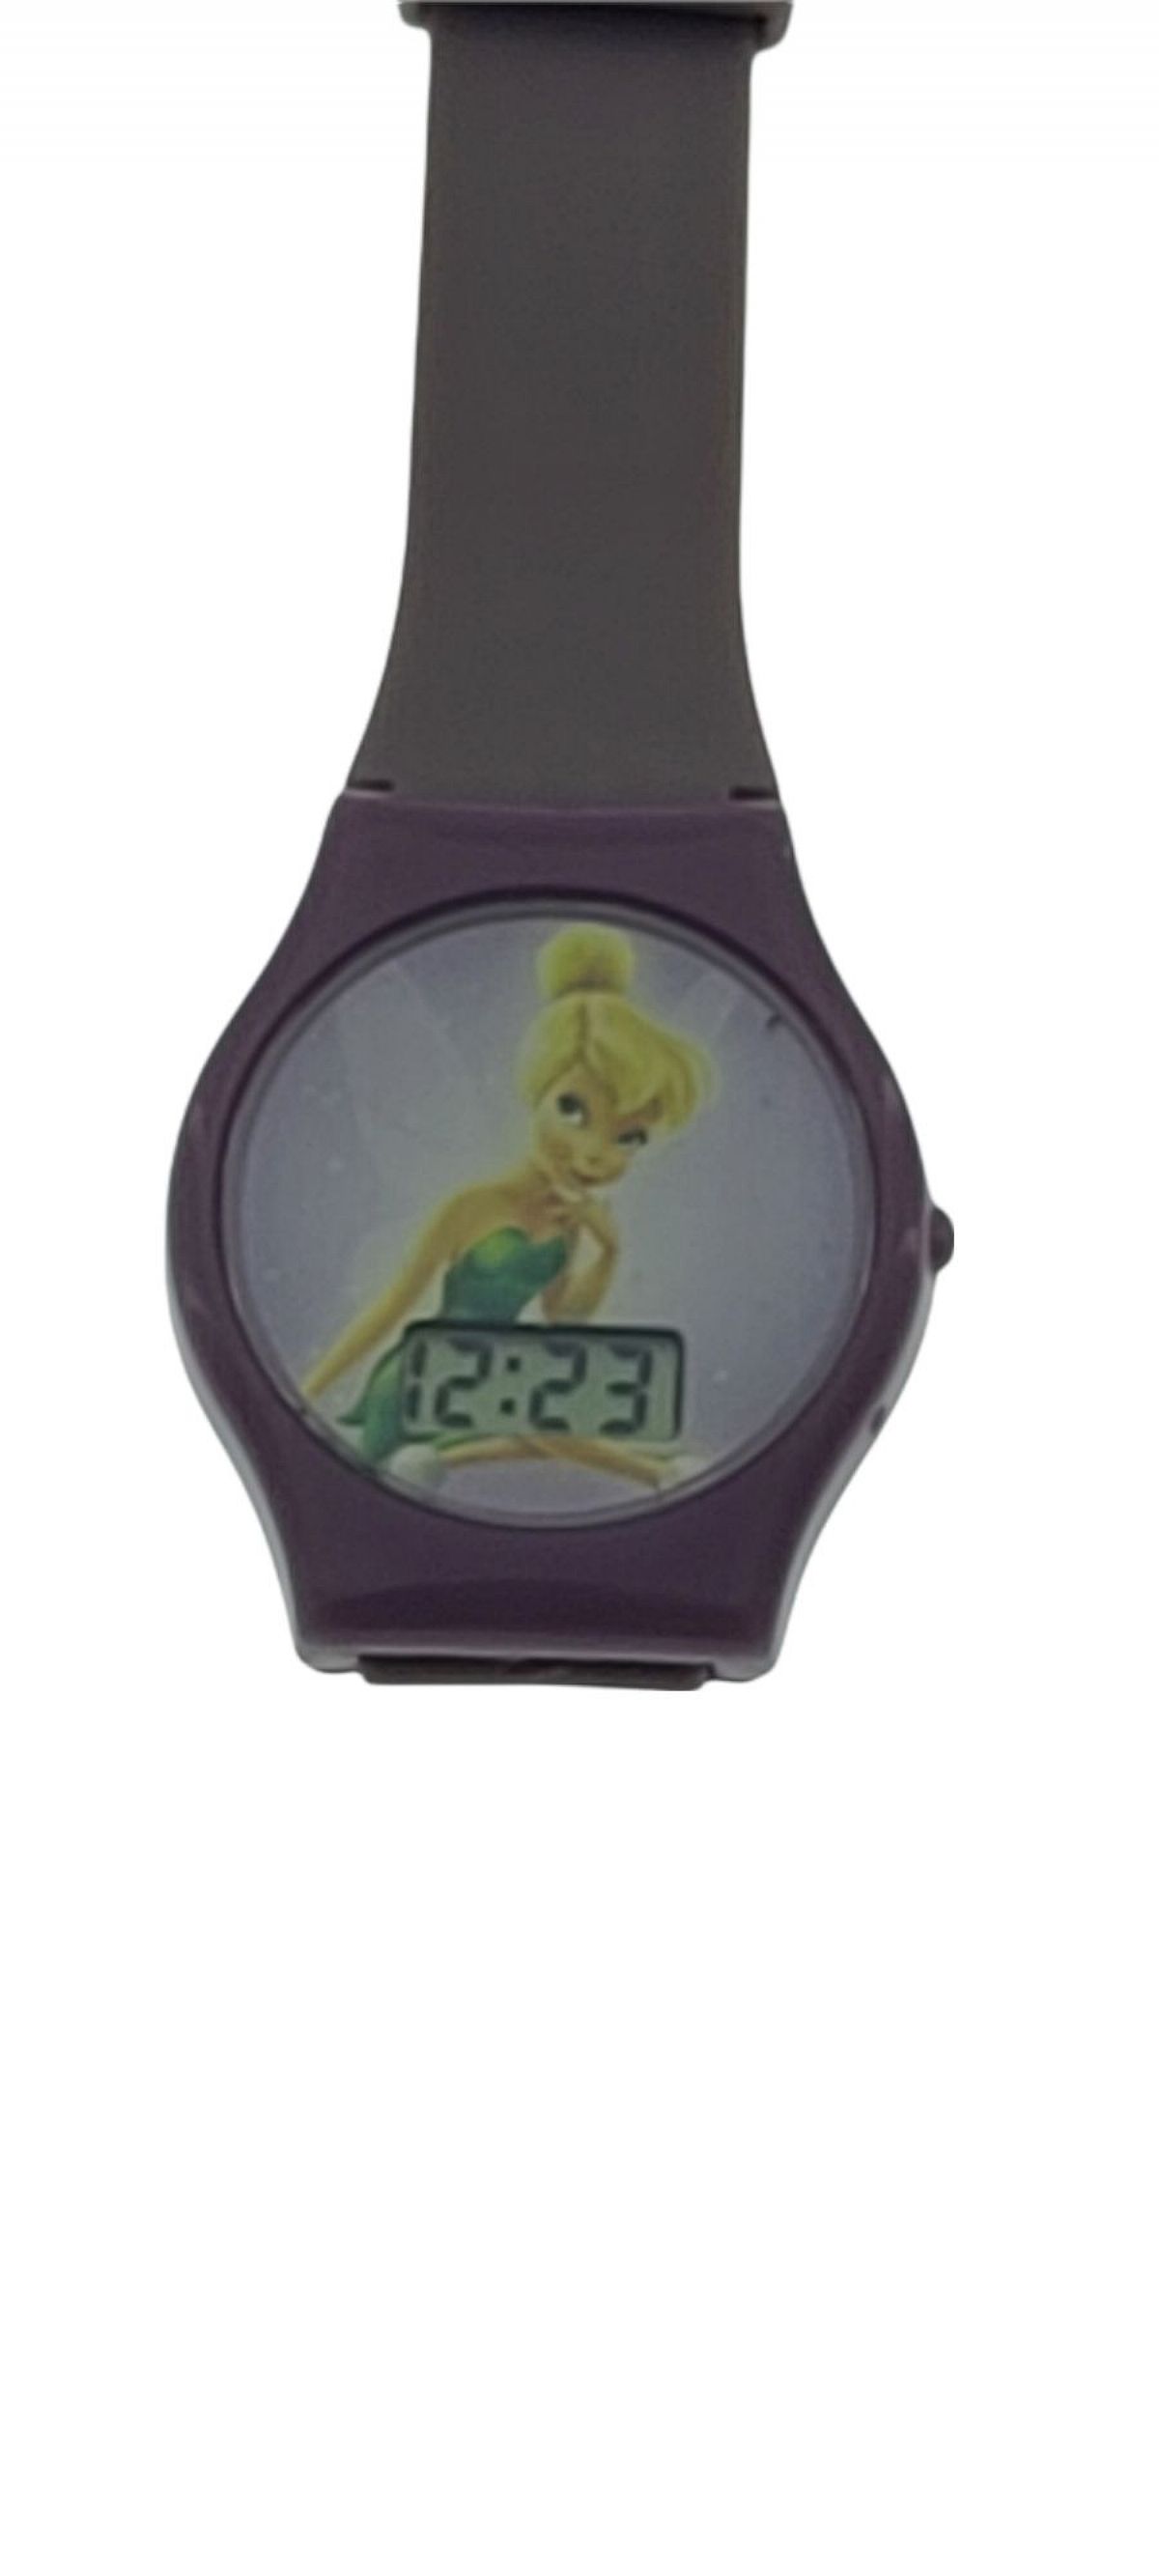 DISNEY classic Tinkerbell watch Black band, silver tone case with heart  Charm | eBay